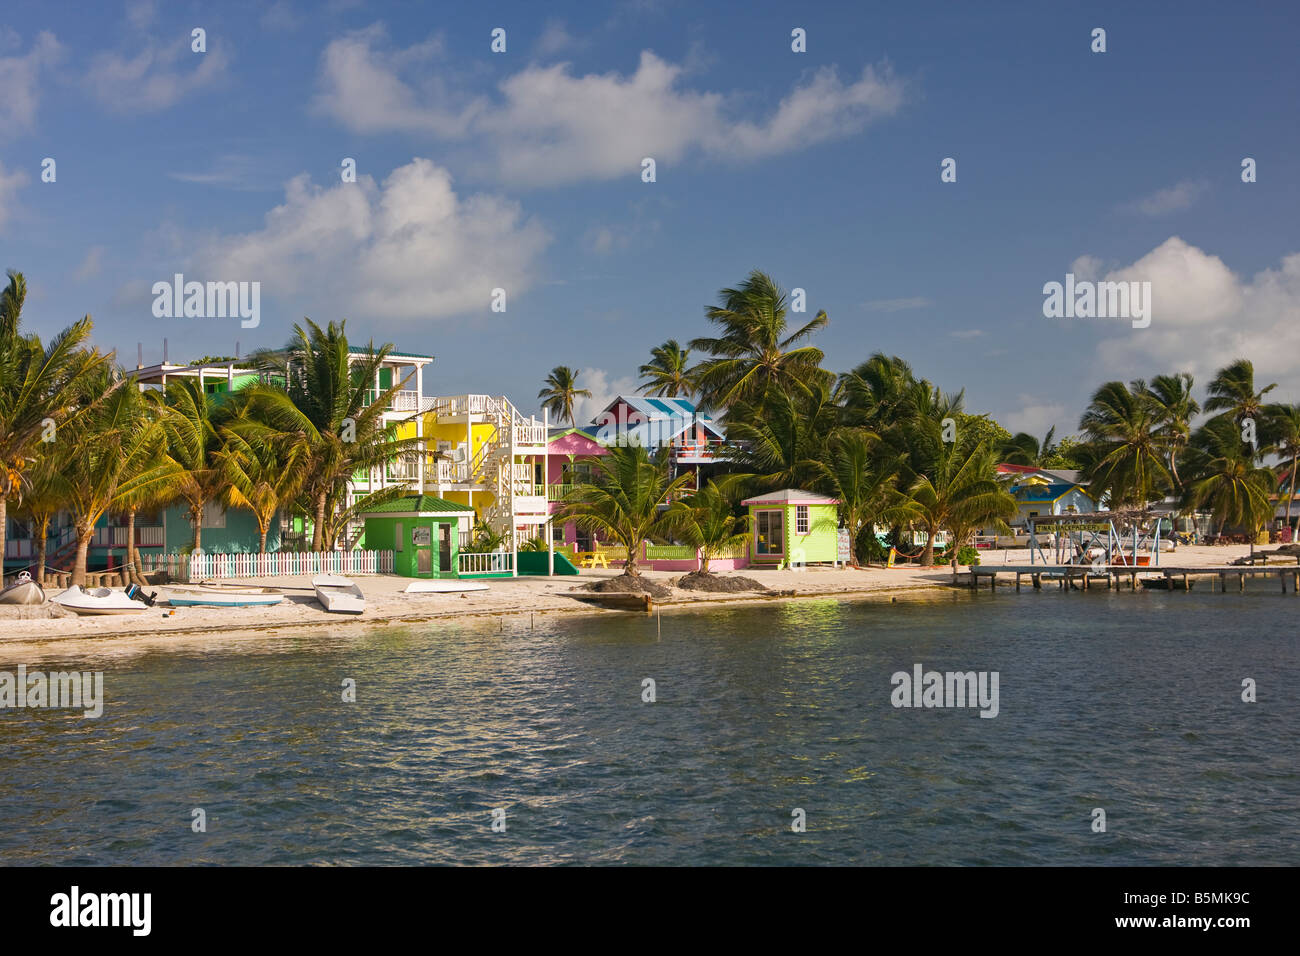 CAYE CAULKER BELIZE Hotels and palm trees on beach Stock Photo